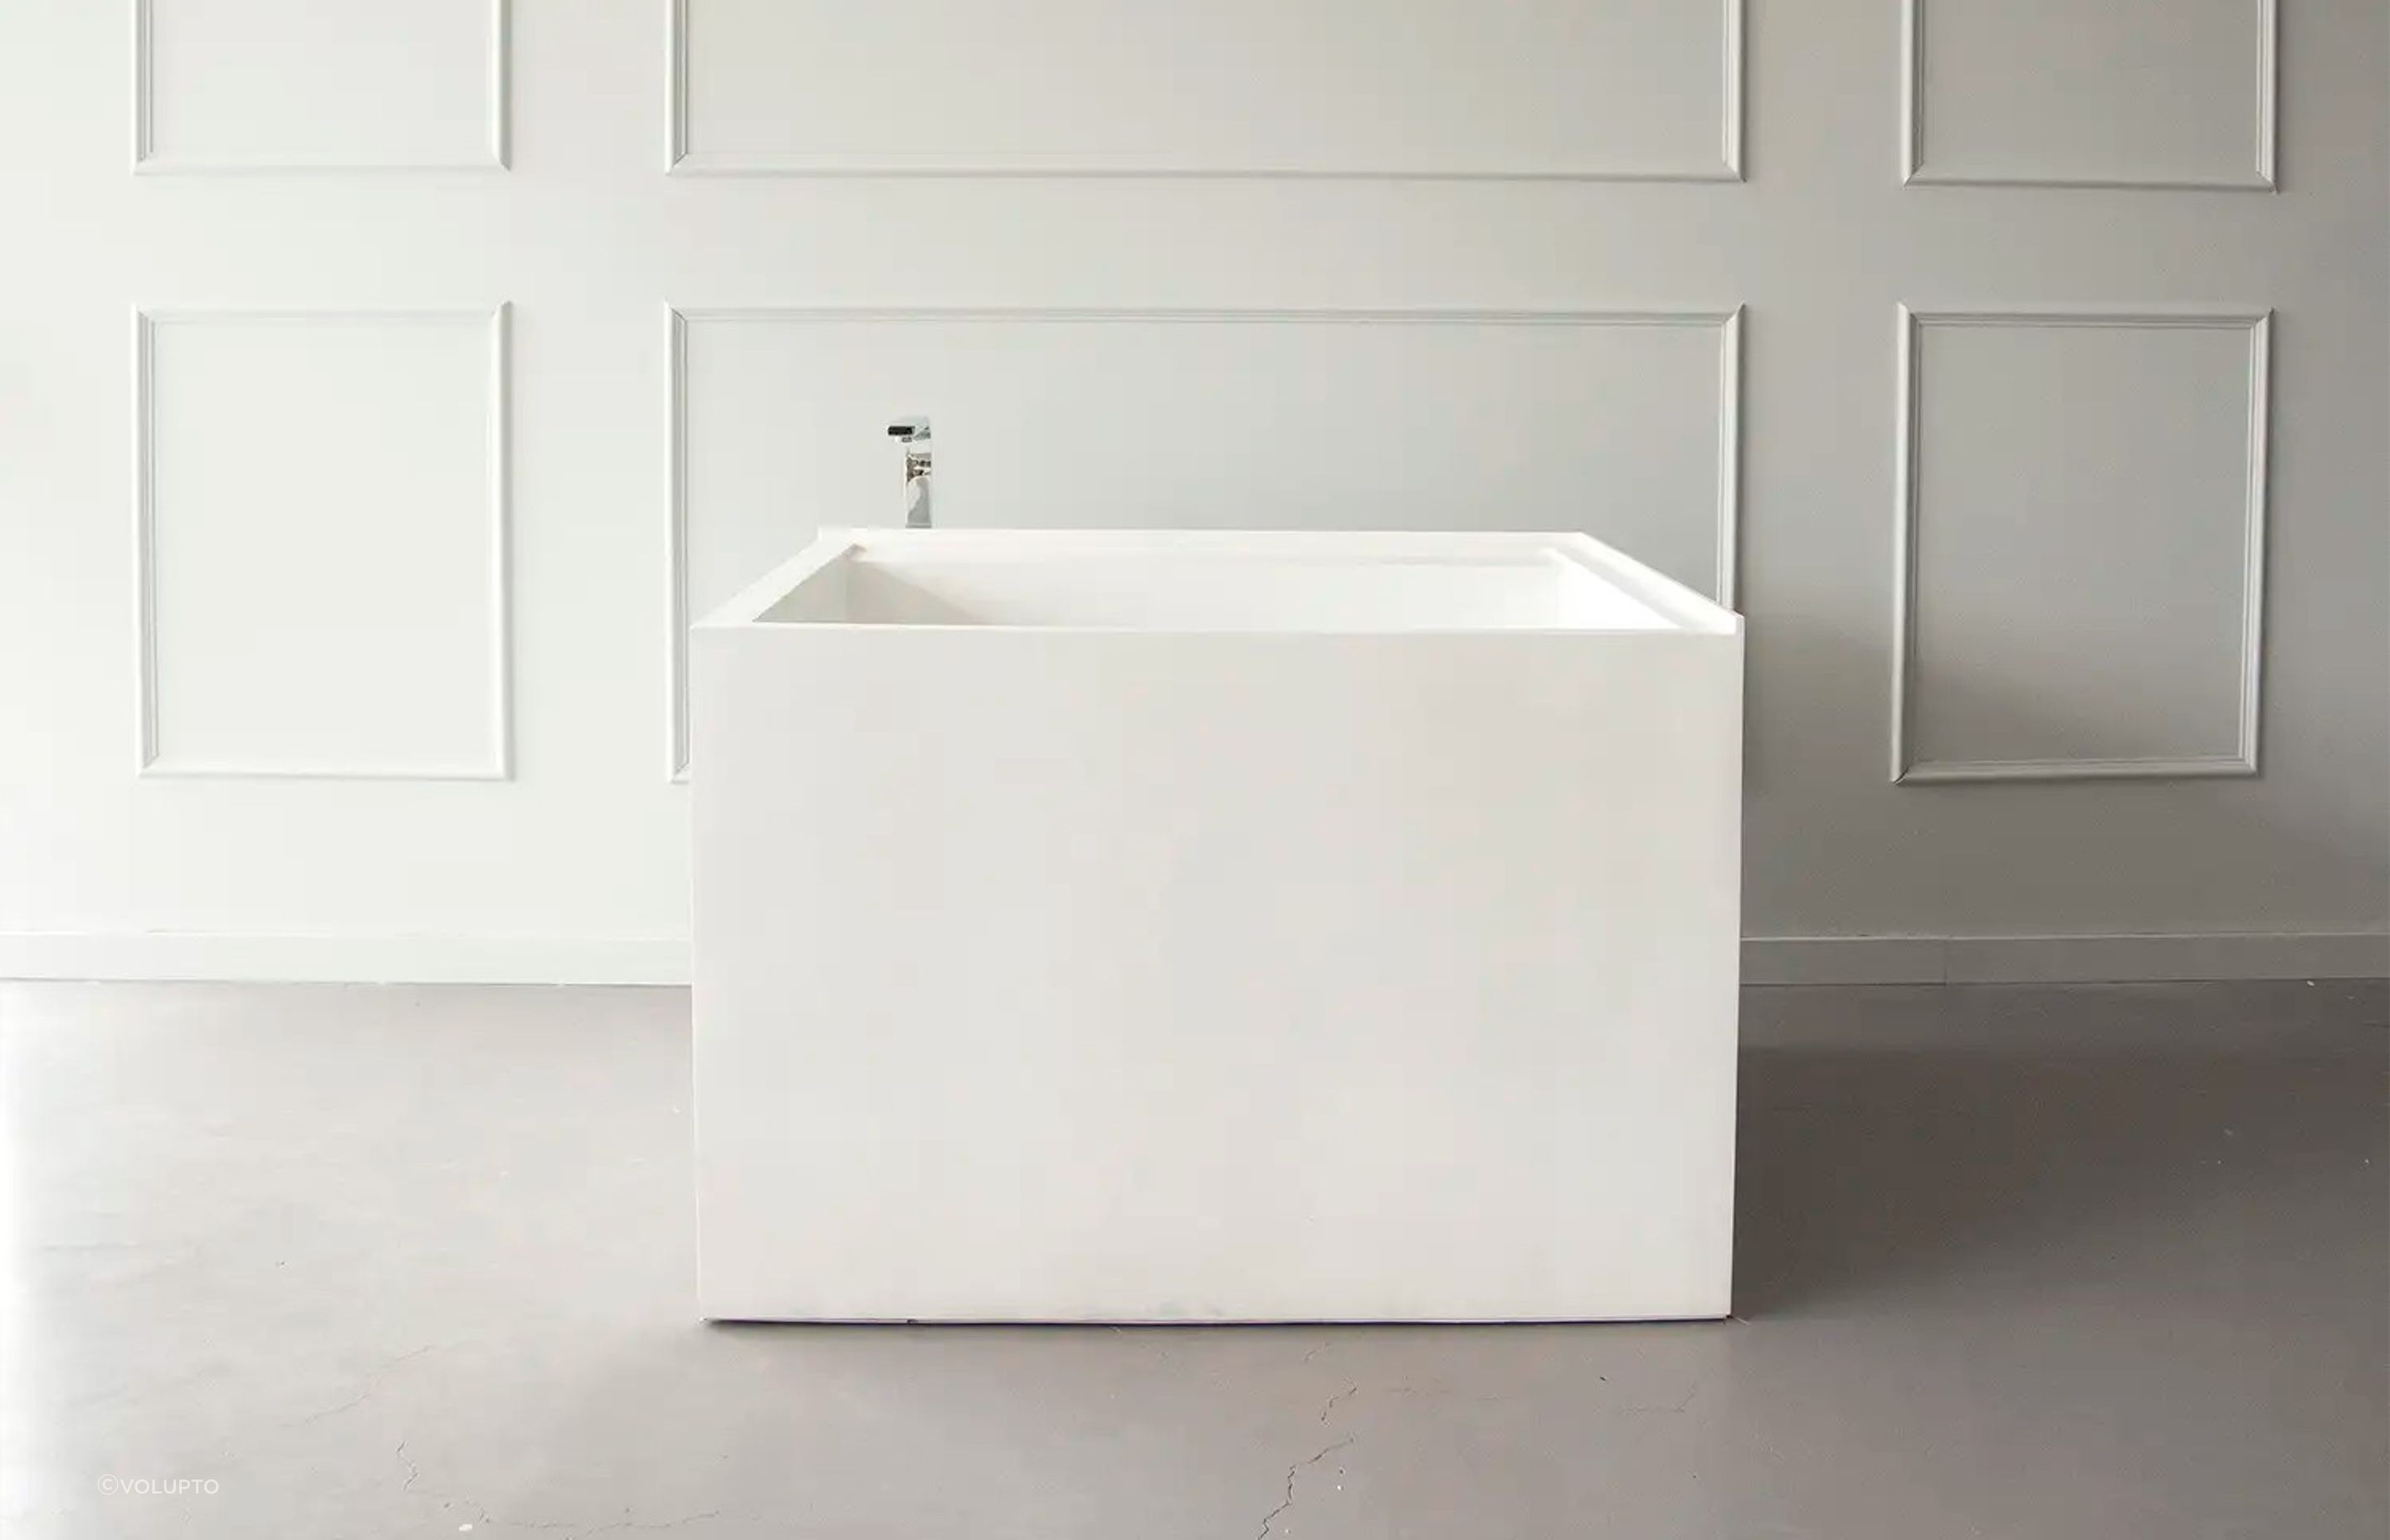 The Japanese Composite Stone Bath from Volupto offers an incredible array of customisable features including options for seating, colours and bespoke dimensions.